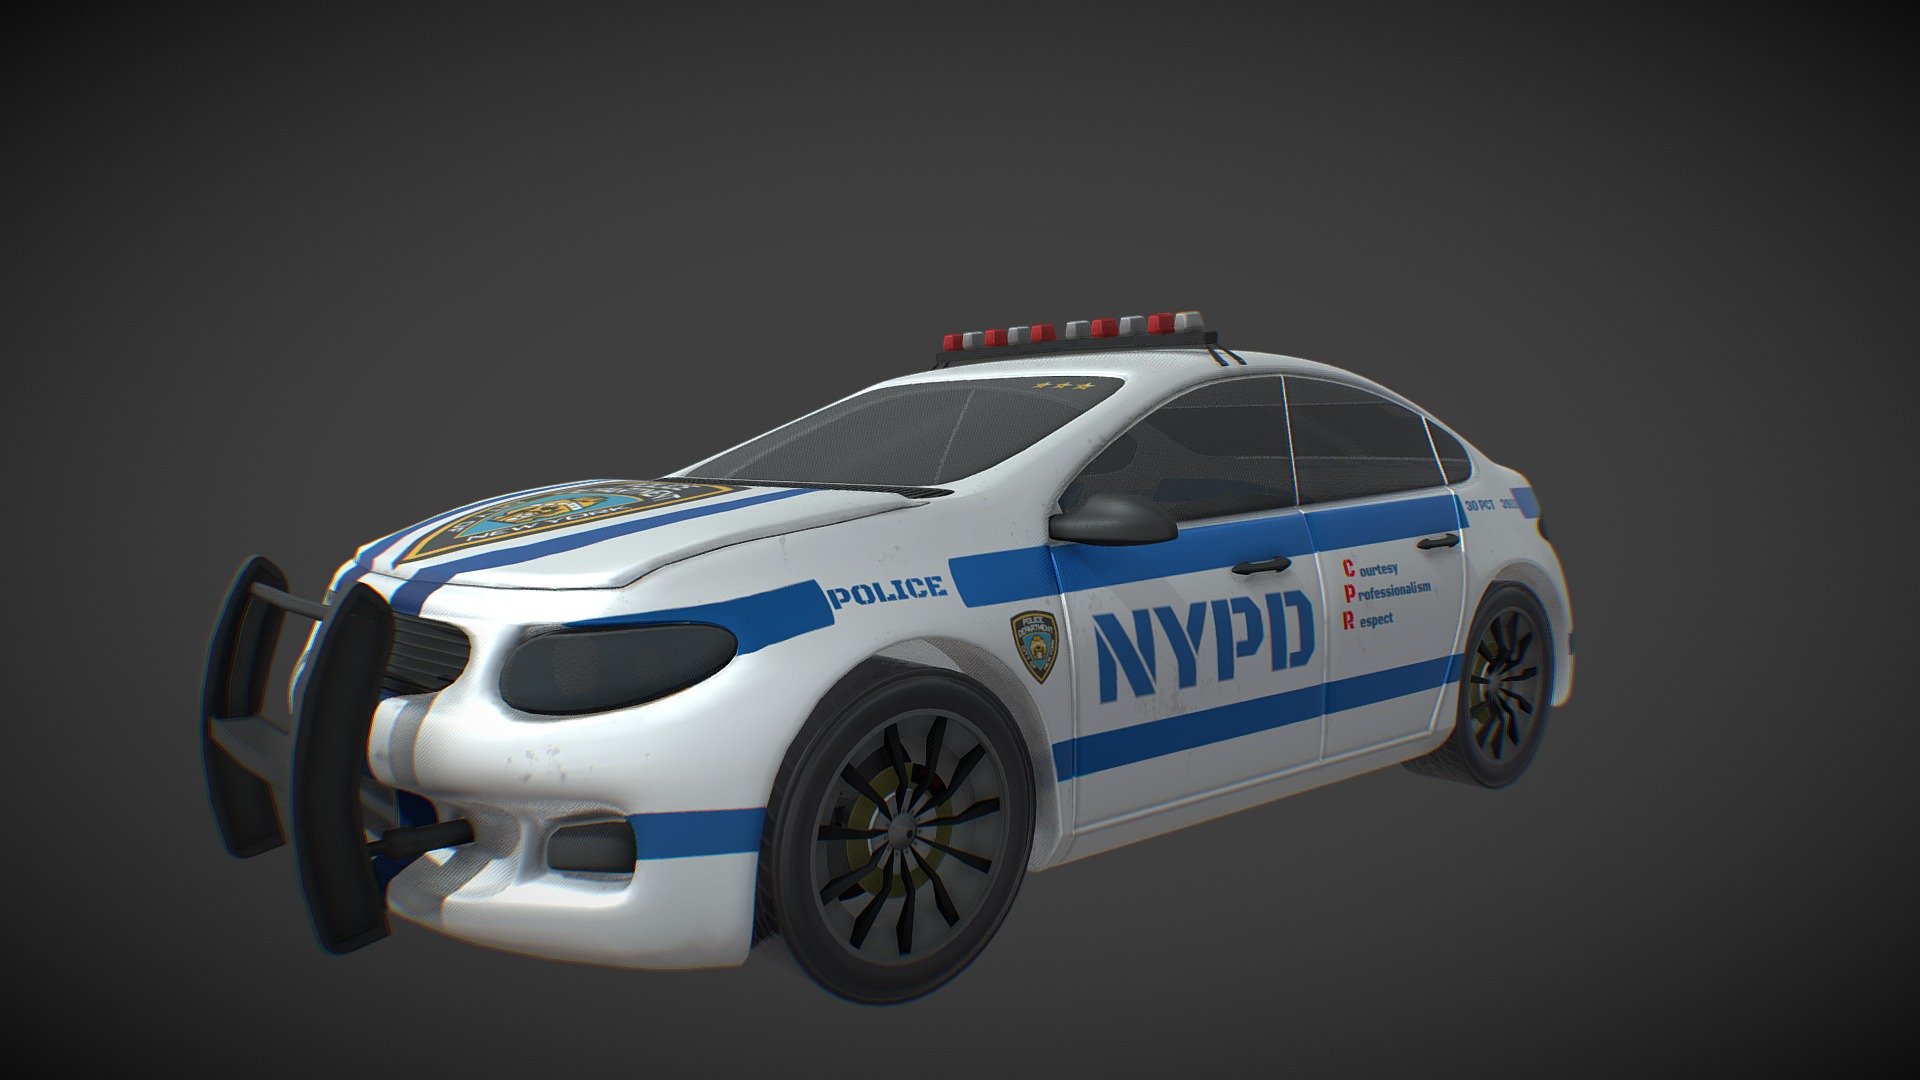 Police Car NYPD - 3D model by MilotoR1 (@m1lotor) 3d model